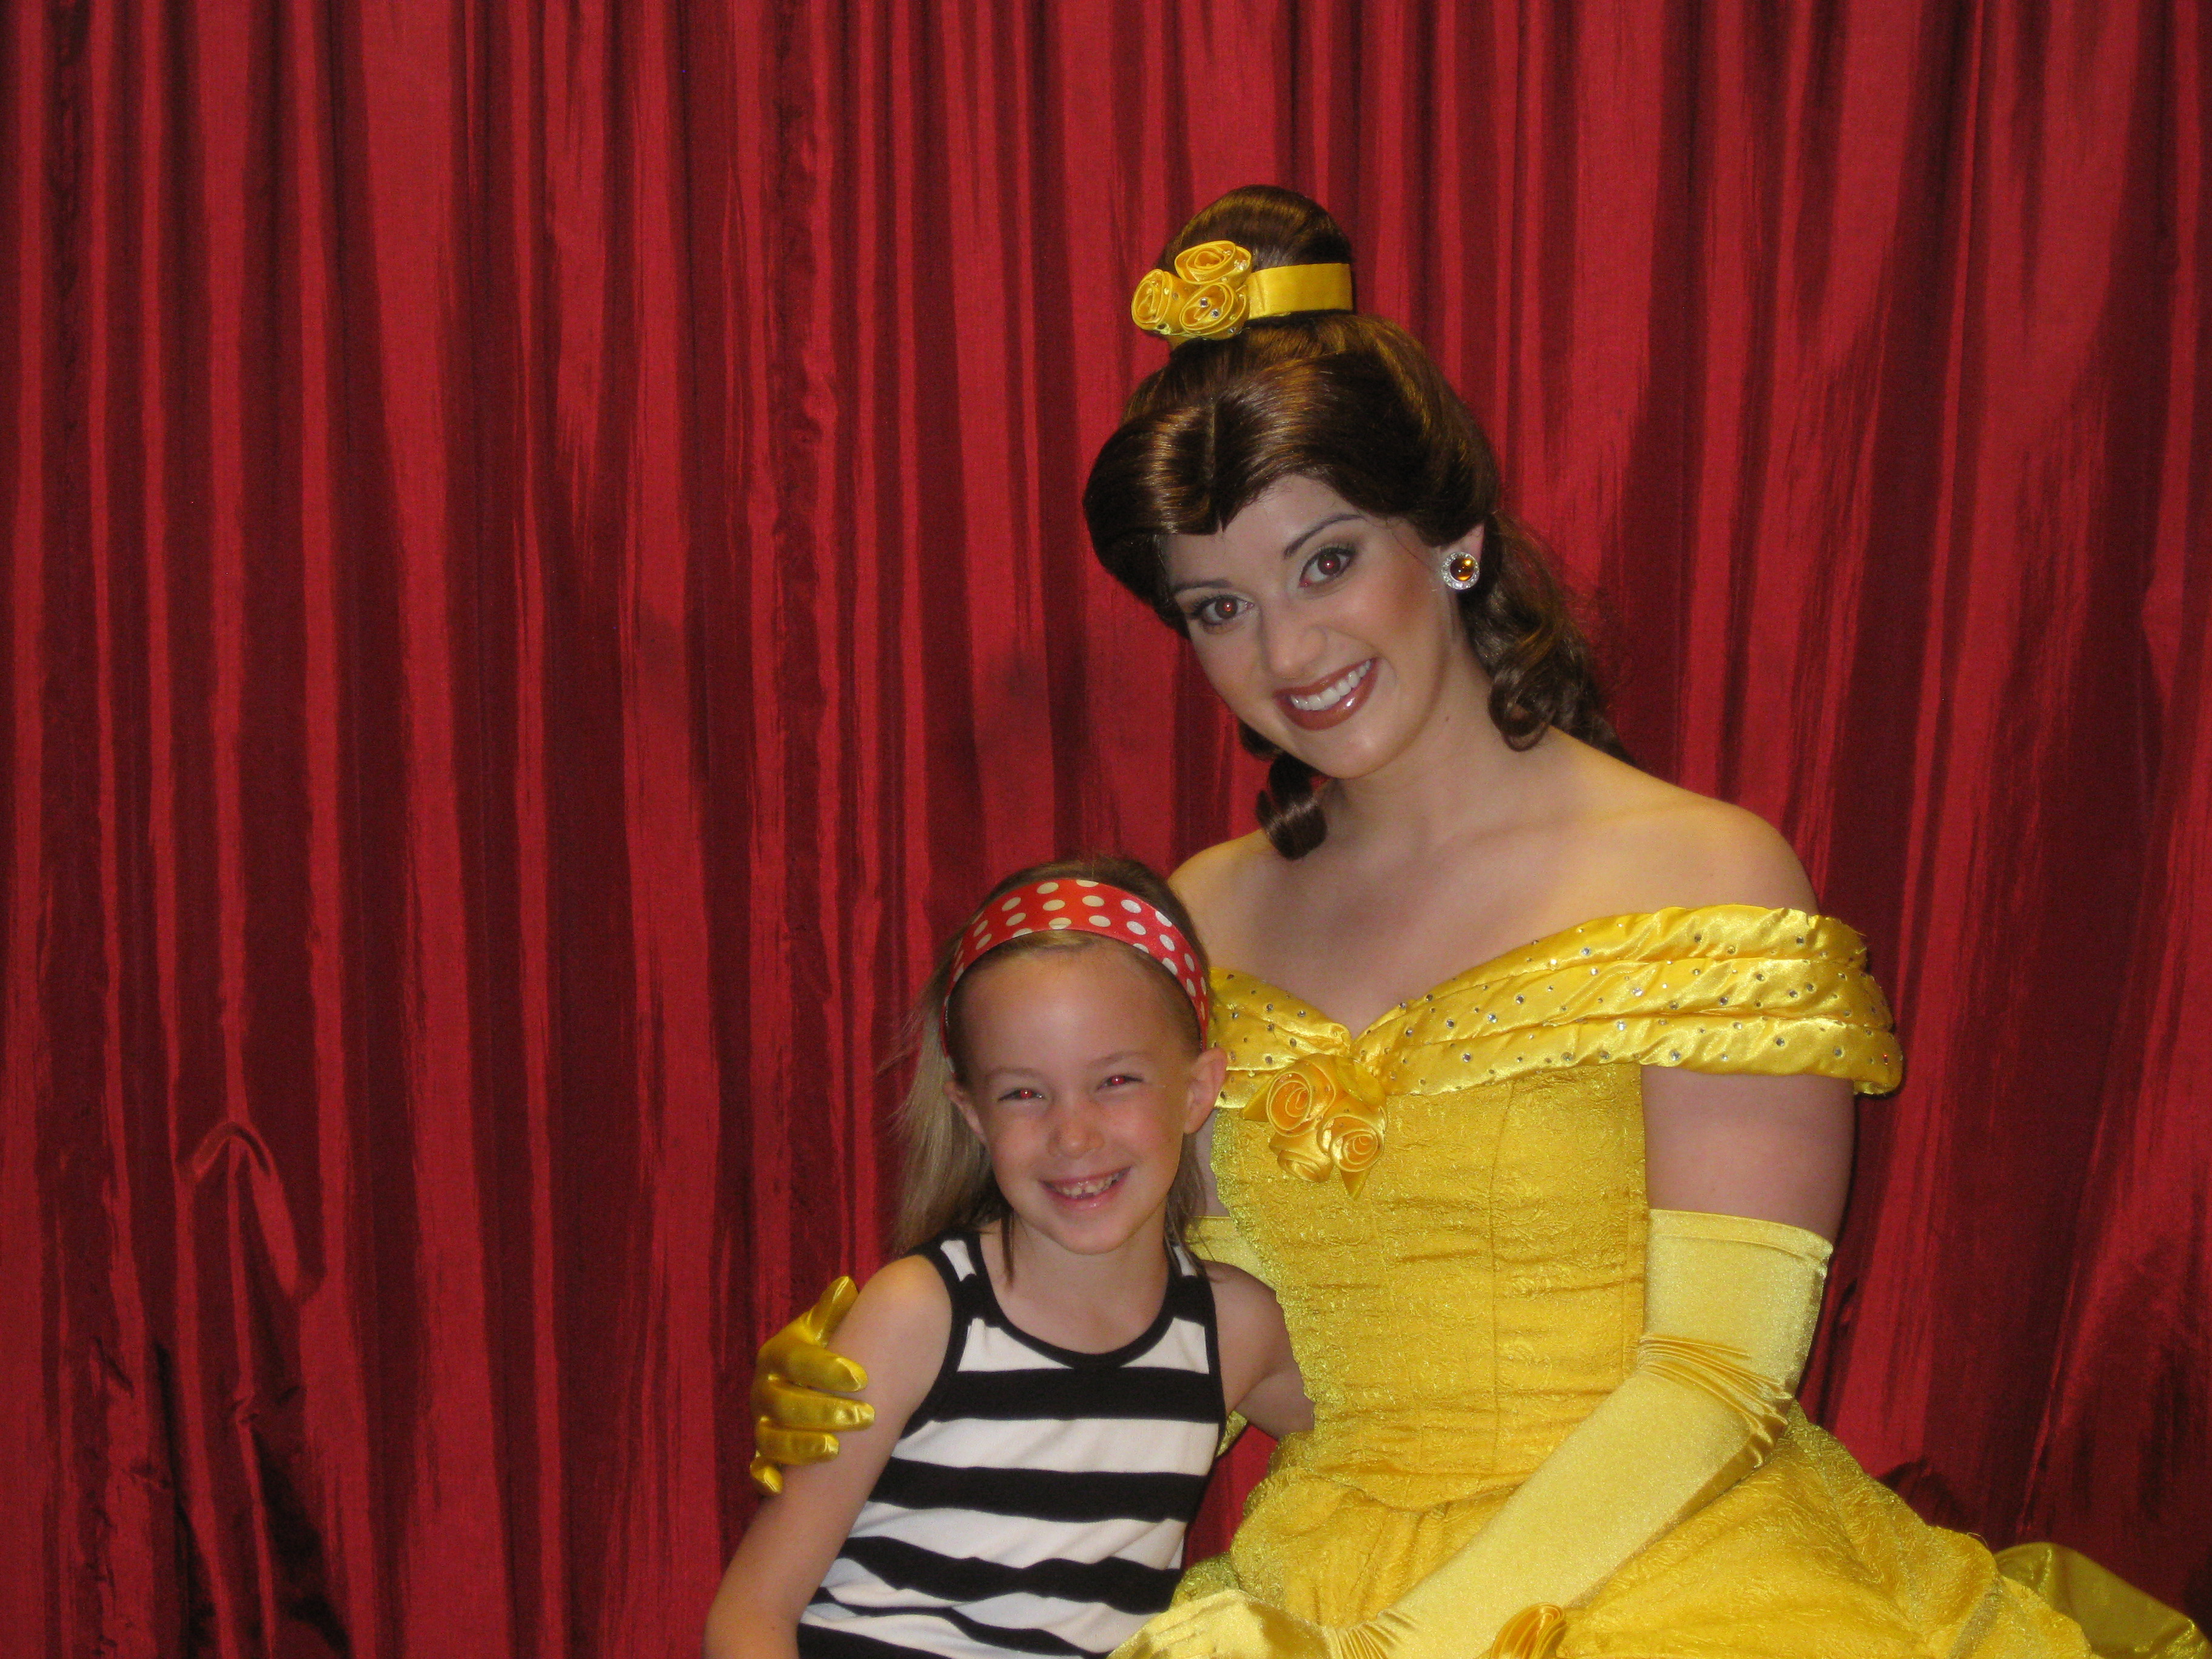 Belle at Toontown in Magic Kingdom 2010